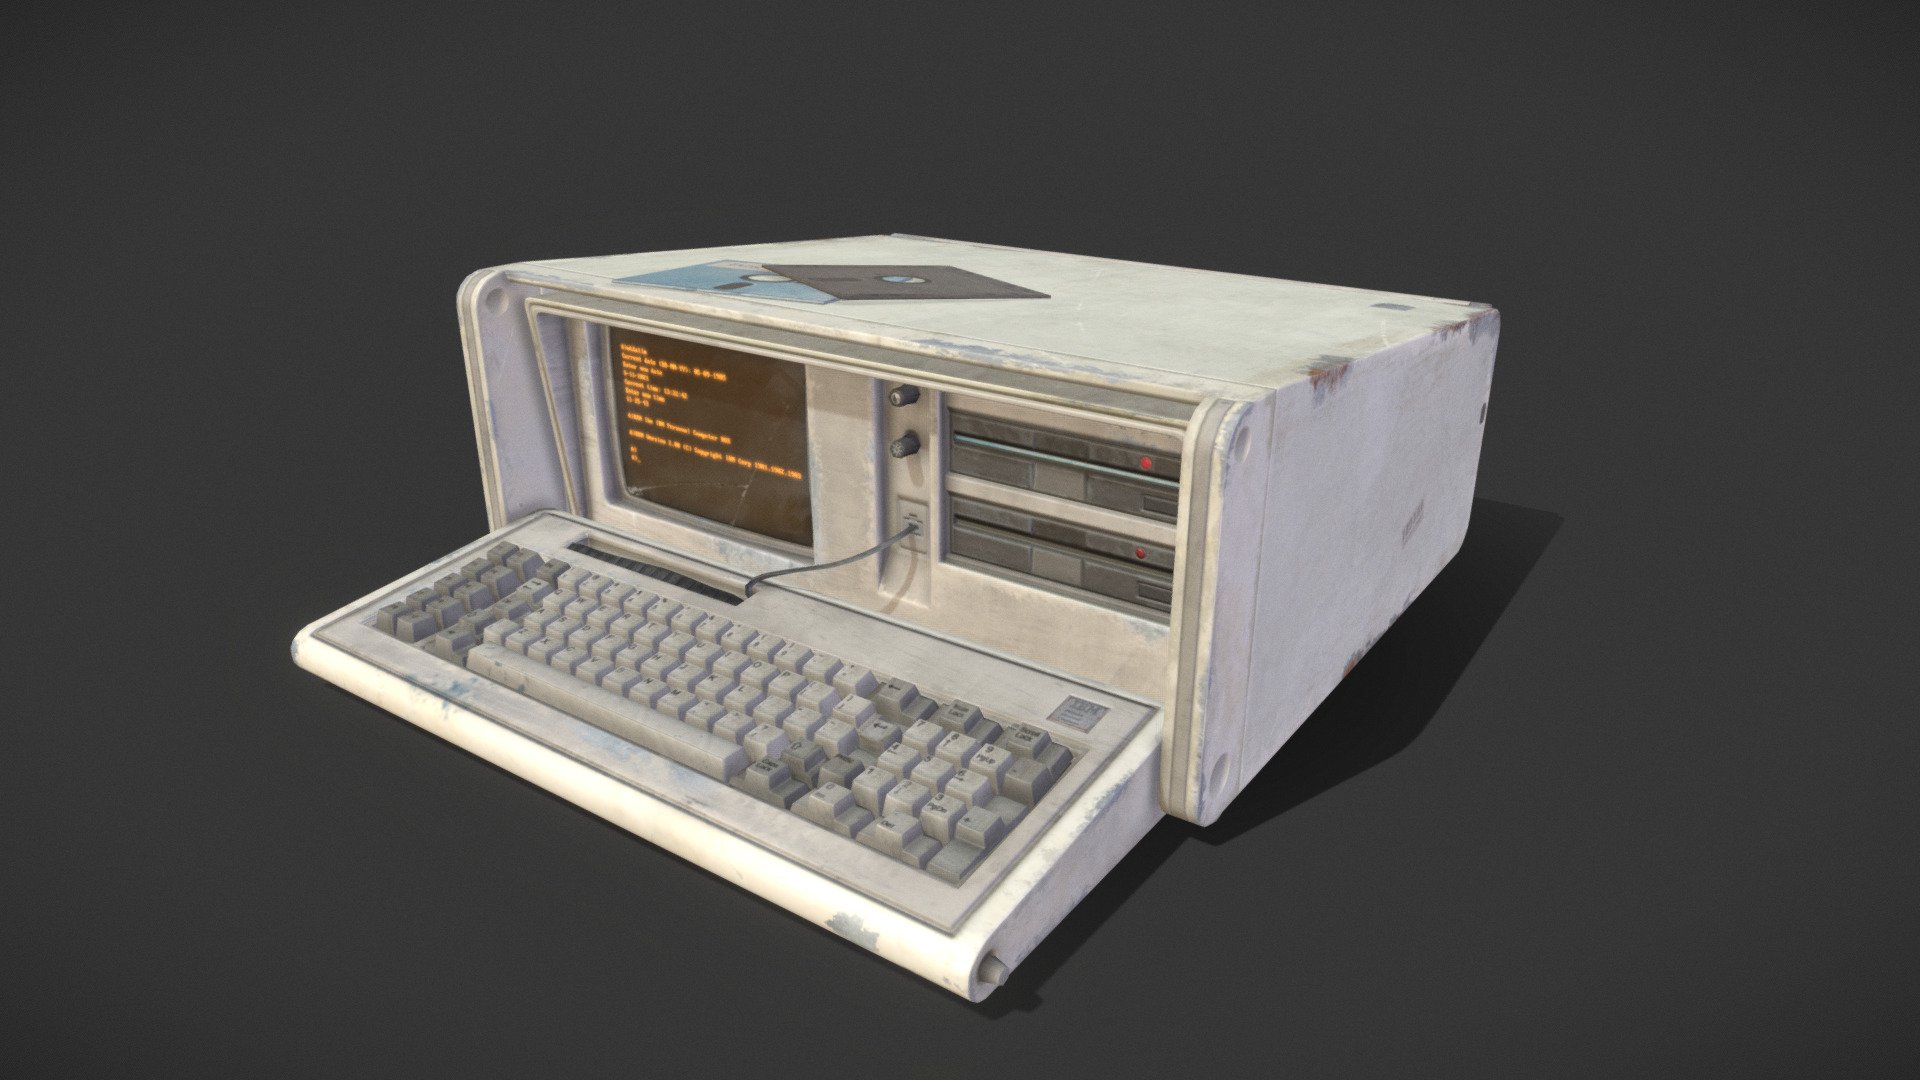 2590 tris;
2 texture sets: main 2048x2048 and subsidiary 1080x1080;
Based on IBM 5155, a &ldquo;Laptop